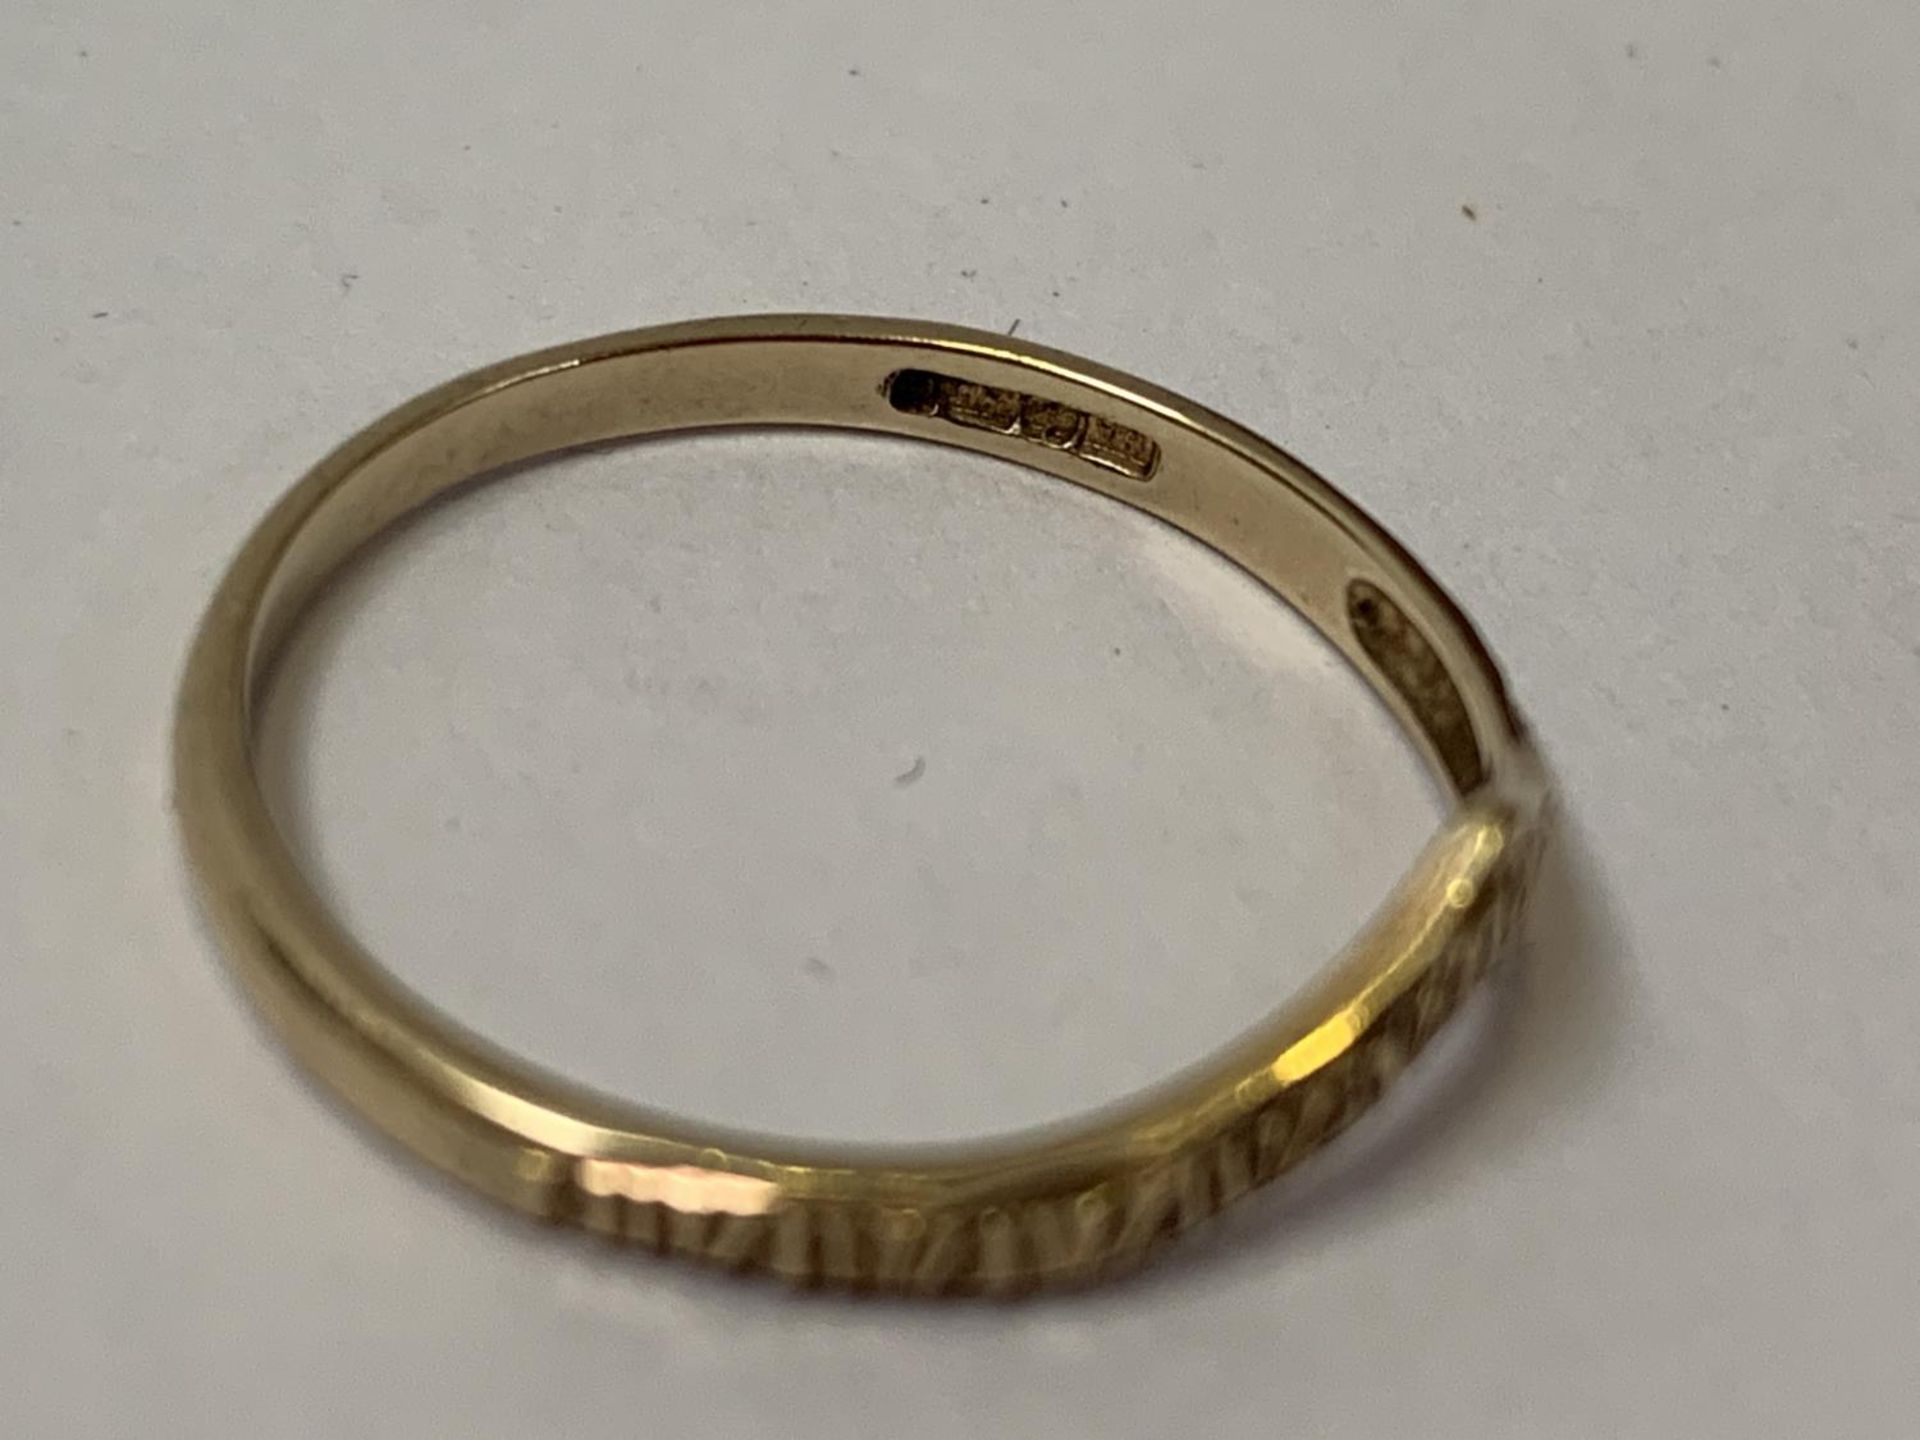 A 9CT GOLD 'V' SHAPED RING, 1.1G WEIGHT - Image 2 of 2